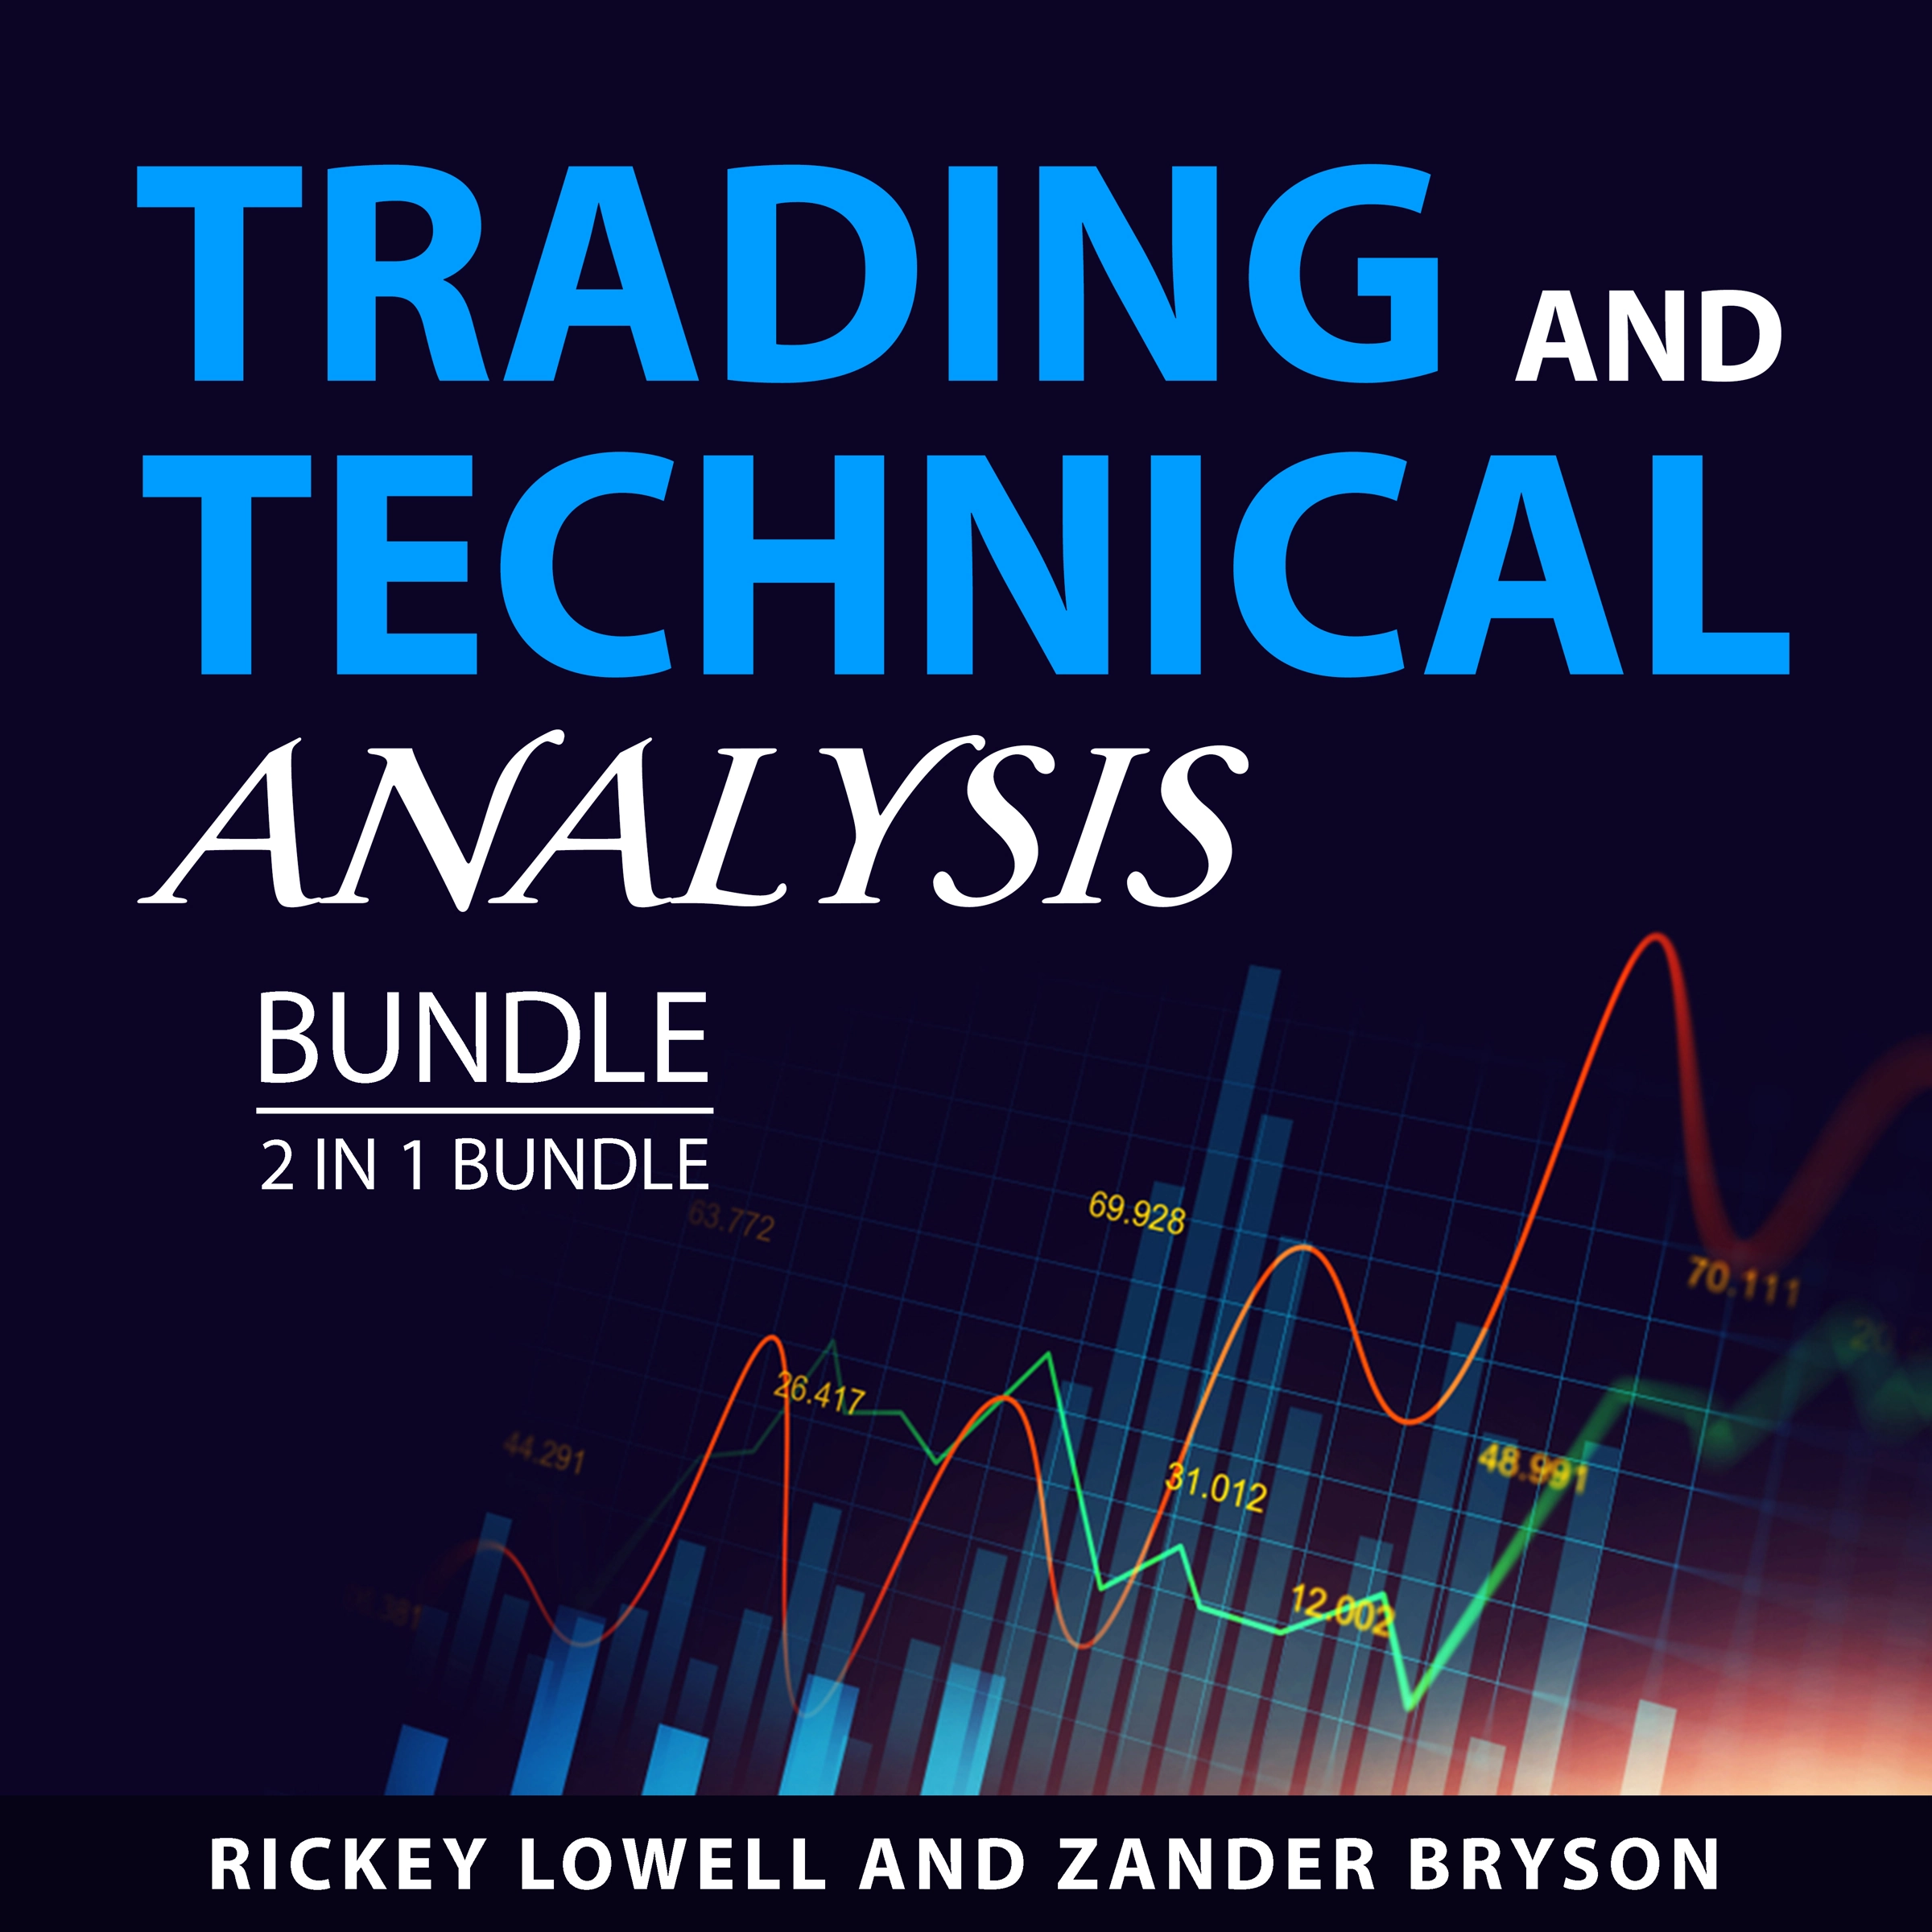 Trading and Technical Analysis Bundle, 2 in 1 Bundle by Zander Bryson Audiobook